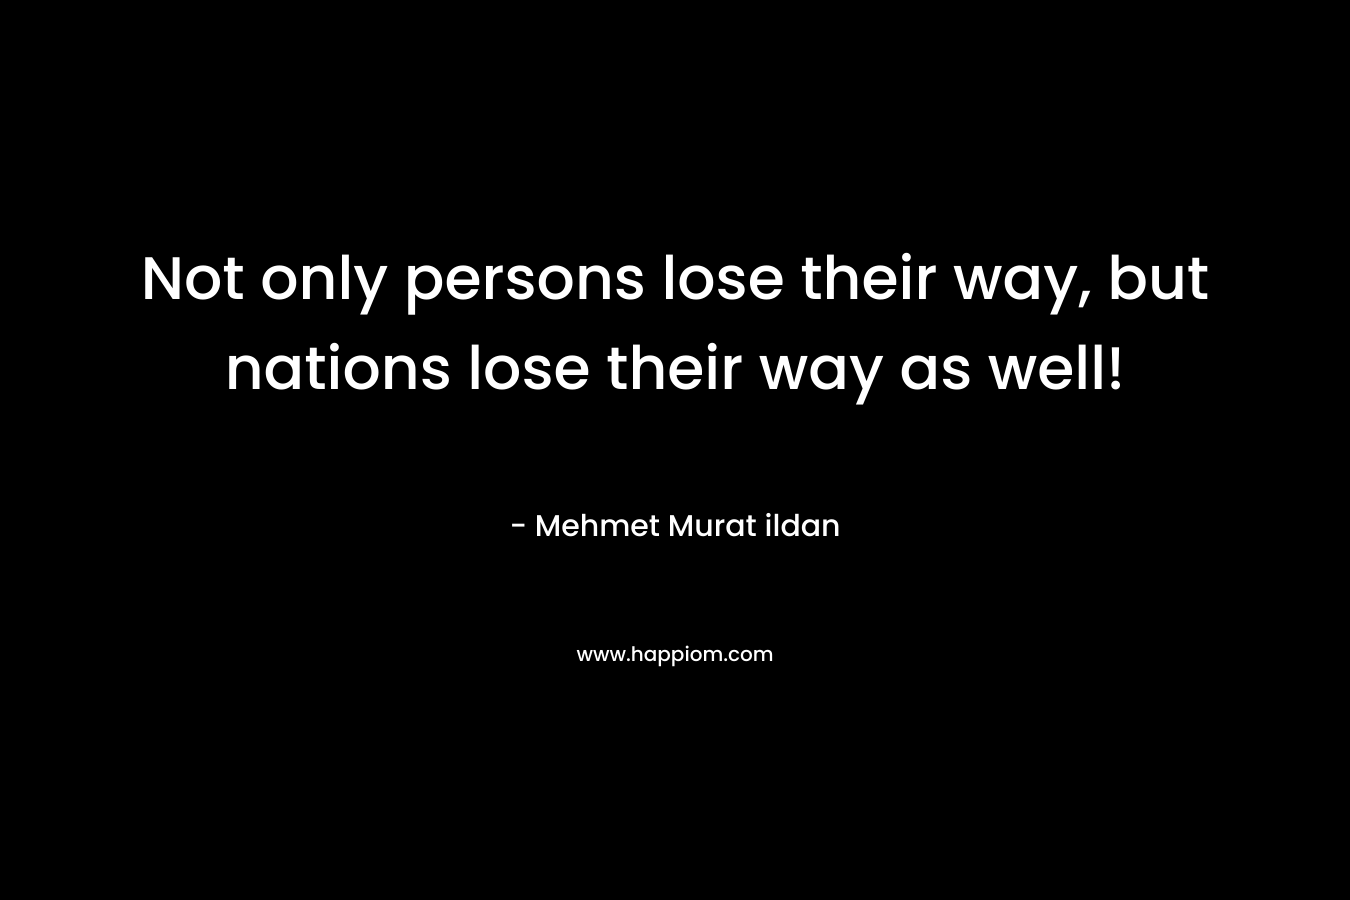 Not only persons lose their way, but nations lose their way as well! – Mehmet Murat ildan